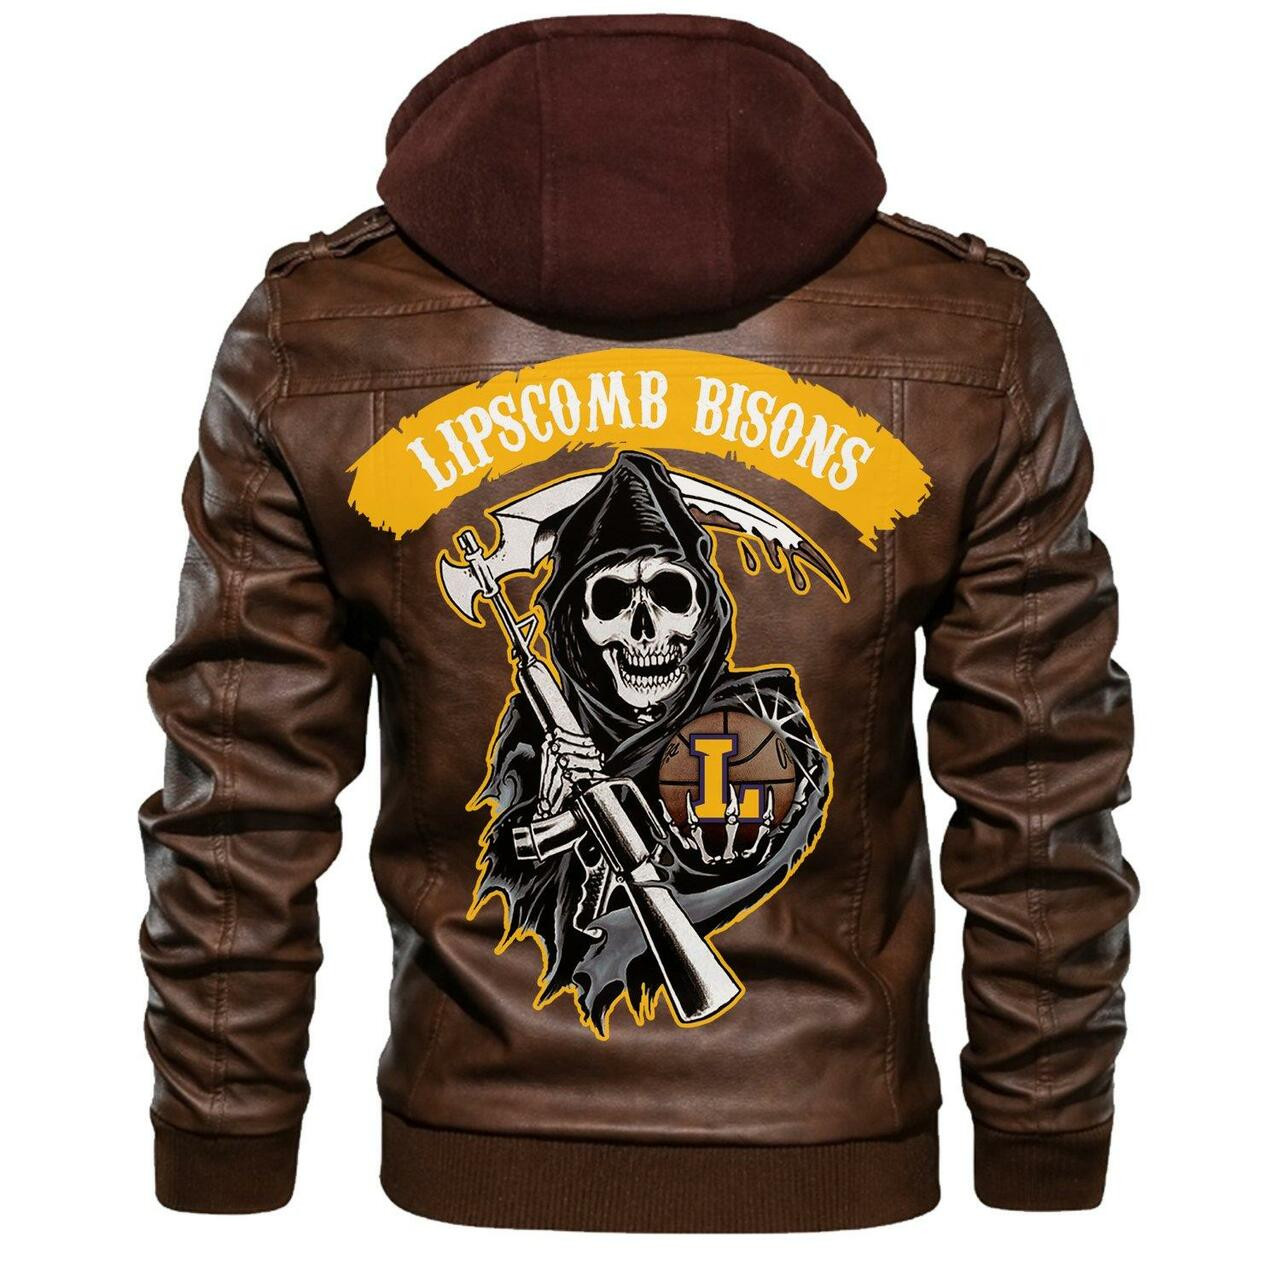 Check out and find the right leather jacket below 243